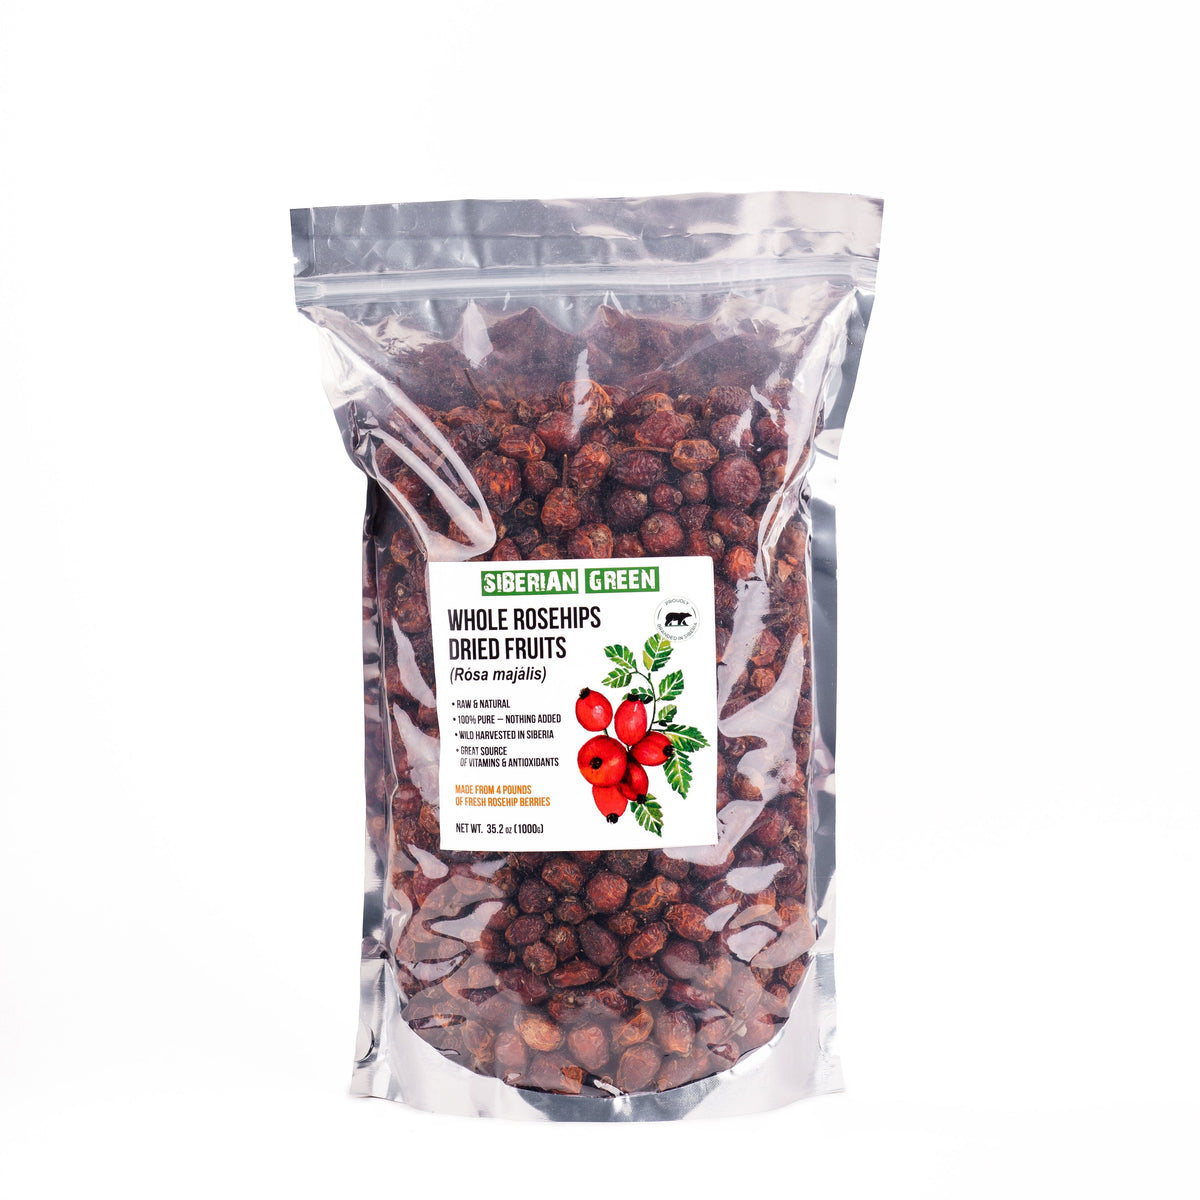 Siberian Dried Rose Hips Whole Seeds 1 kg Rosehips Herbal Tea Directly from Siberia Altai Mountains and Taiga